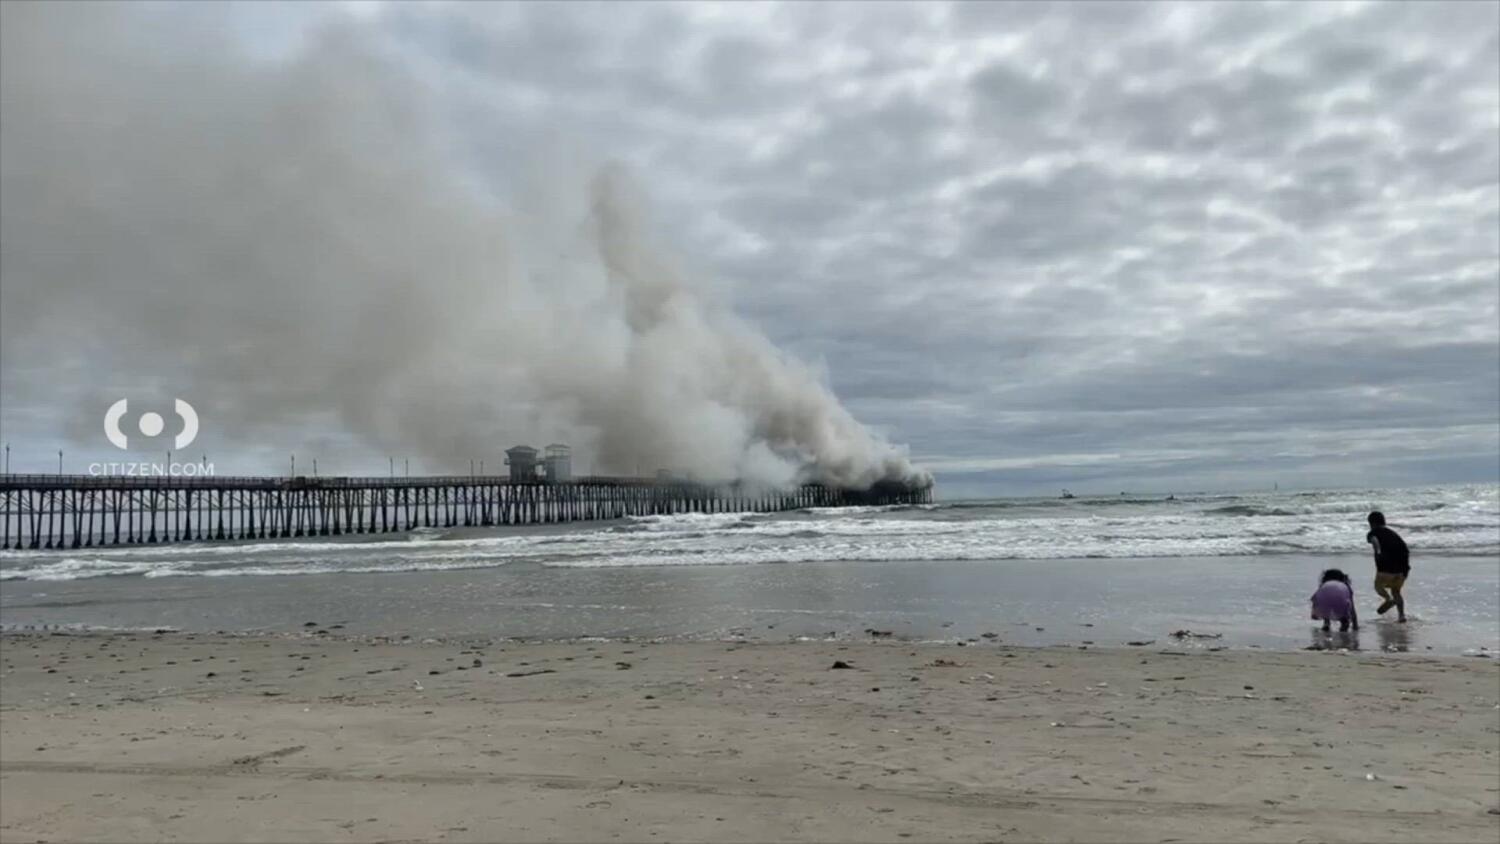 Oceanside pier engulfed in flames. Firefighters have contained the blaze, city officials say